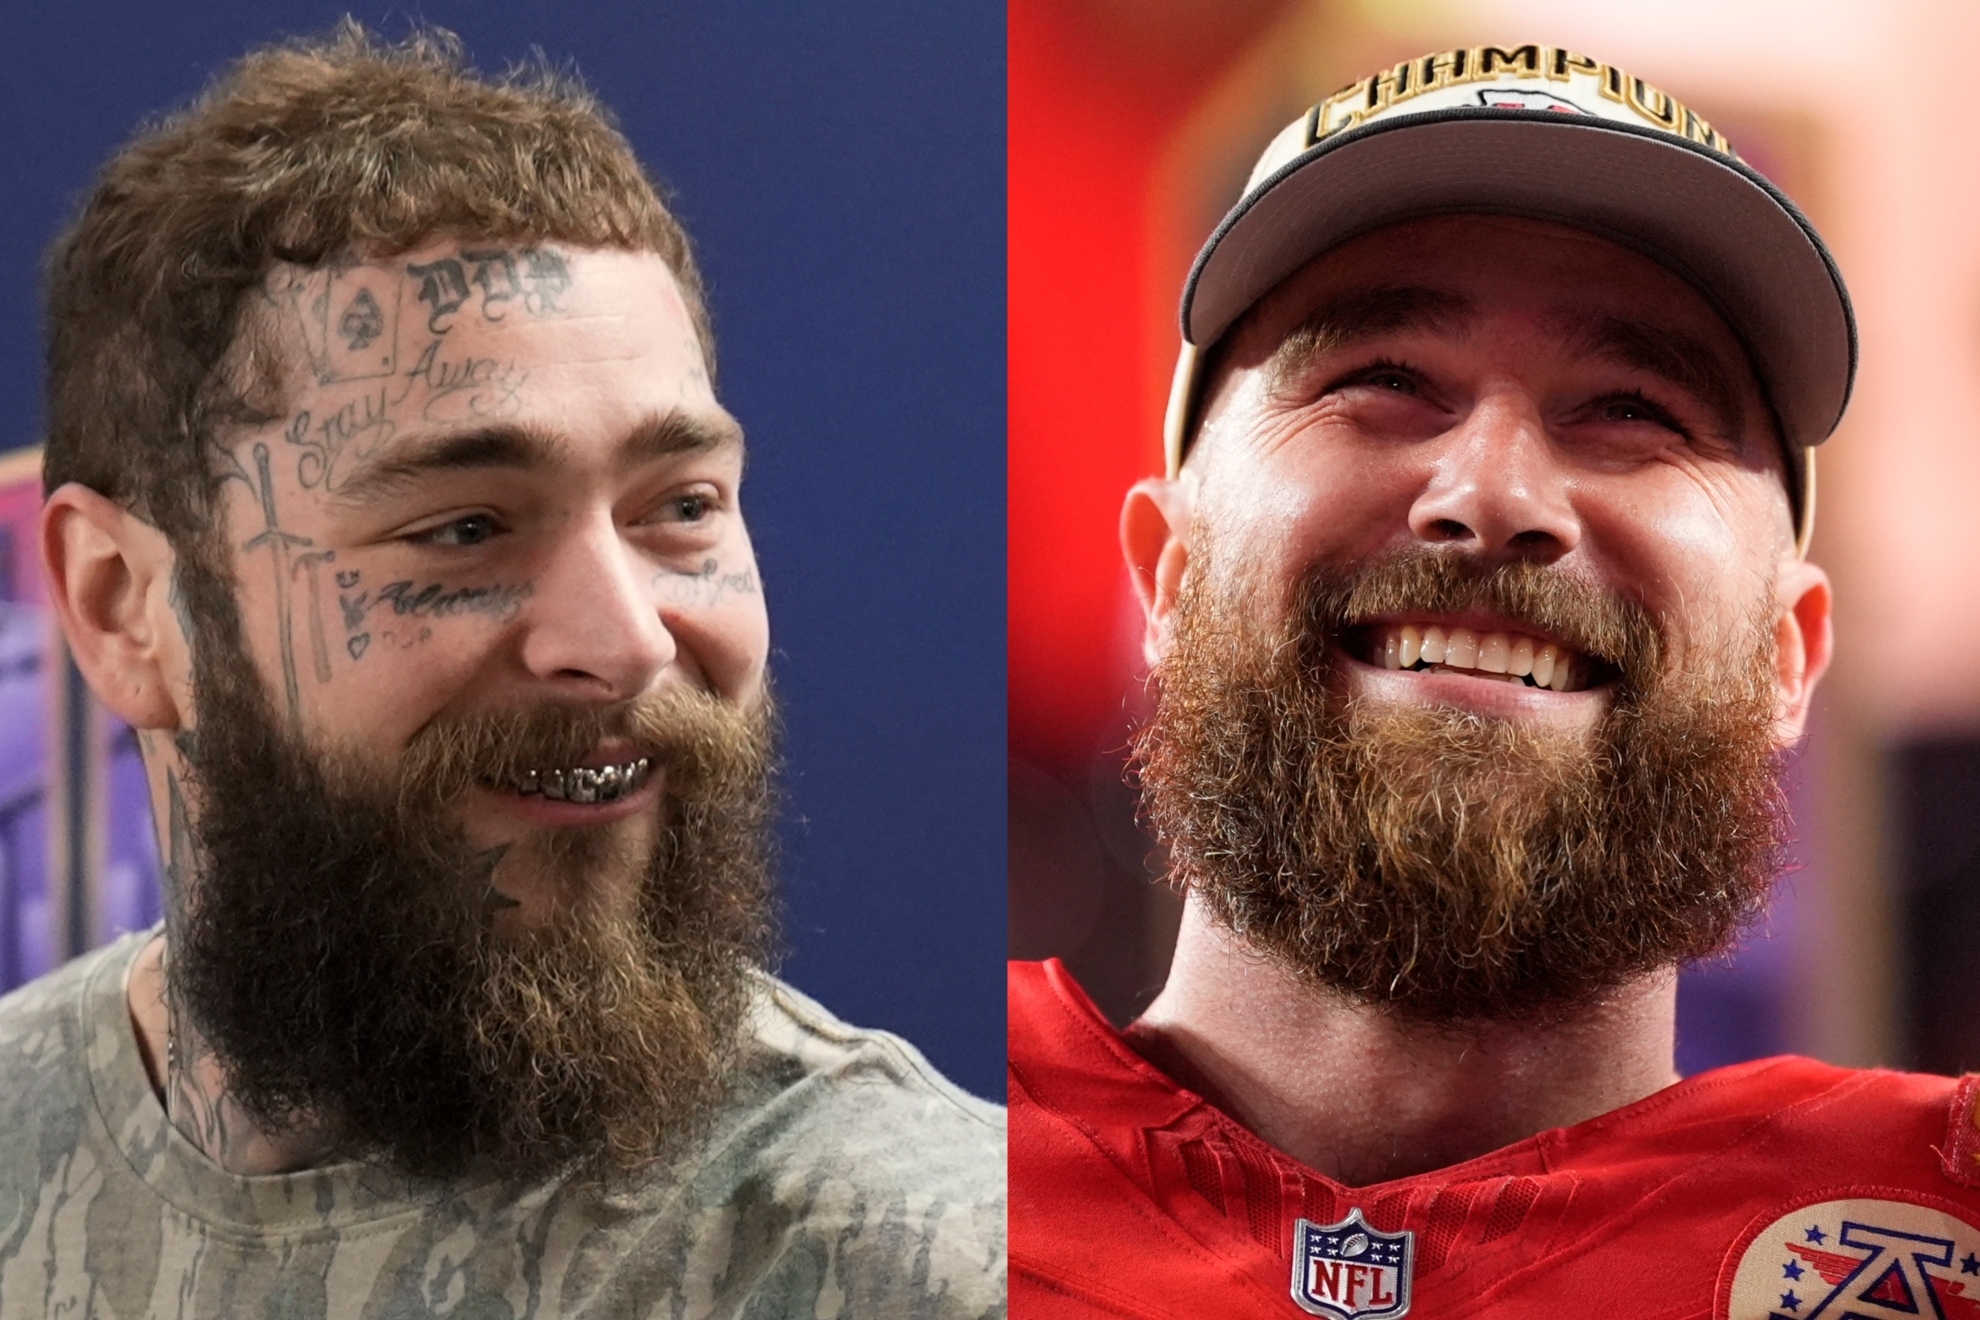 Friendly bet ends with Post Malone getting Chiefs tattoos